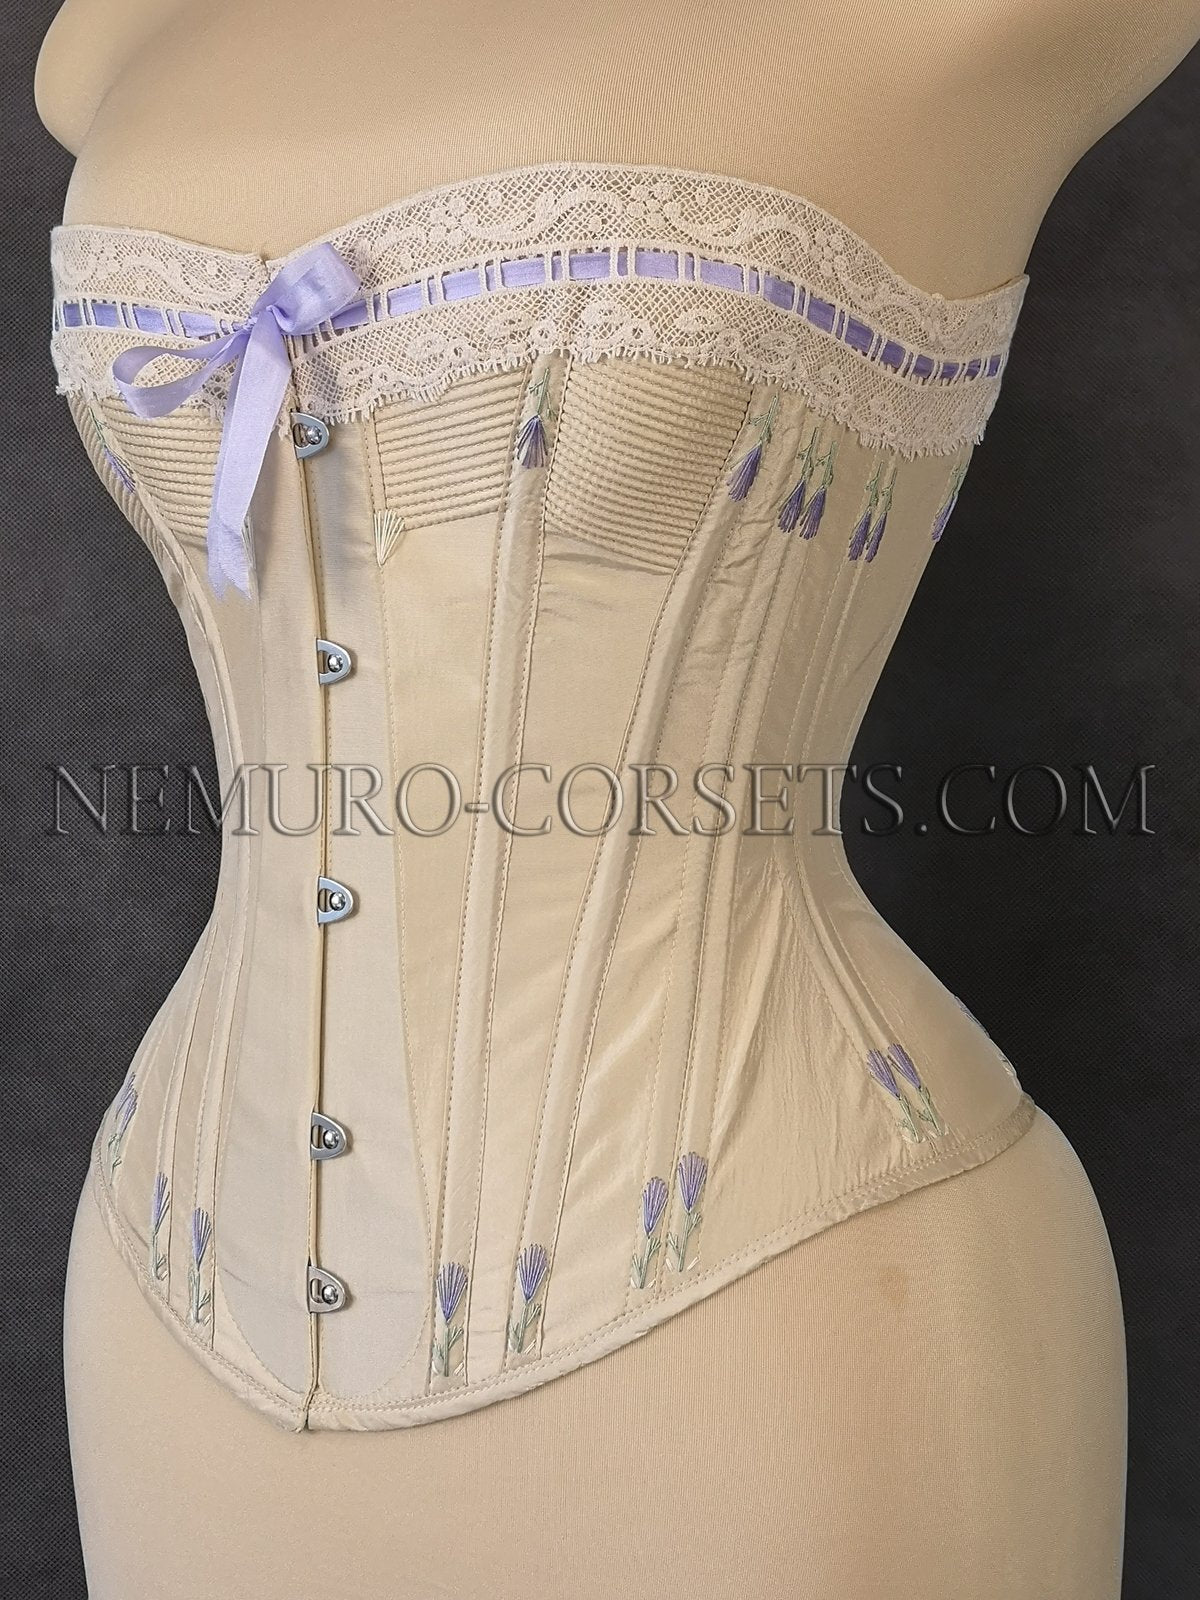 CORSET DISPLAY FORM 1890s WITH RIBBON CORSET VICTORIAN RARE WOOD BASE